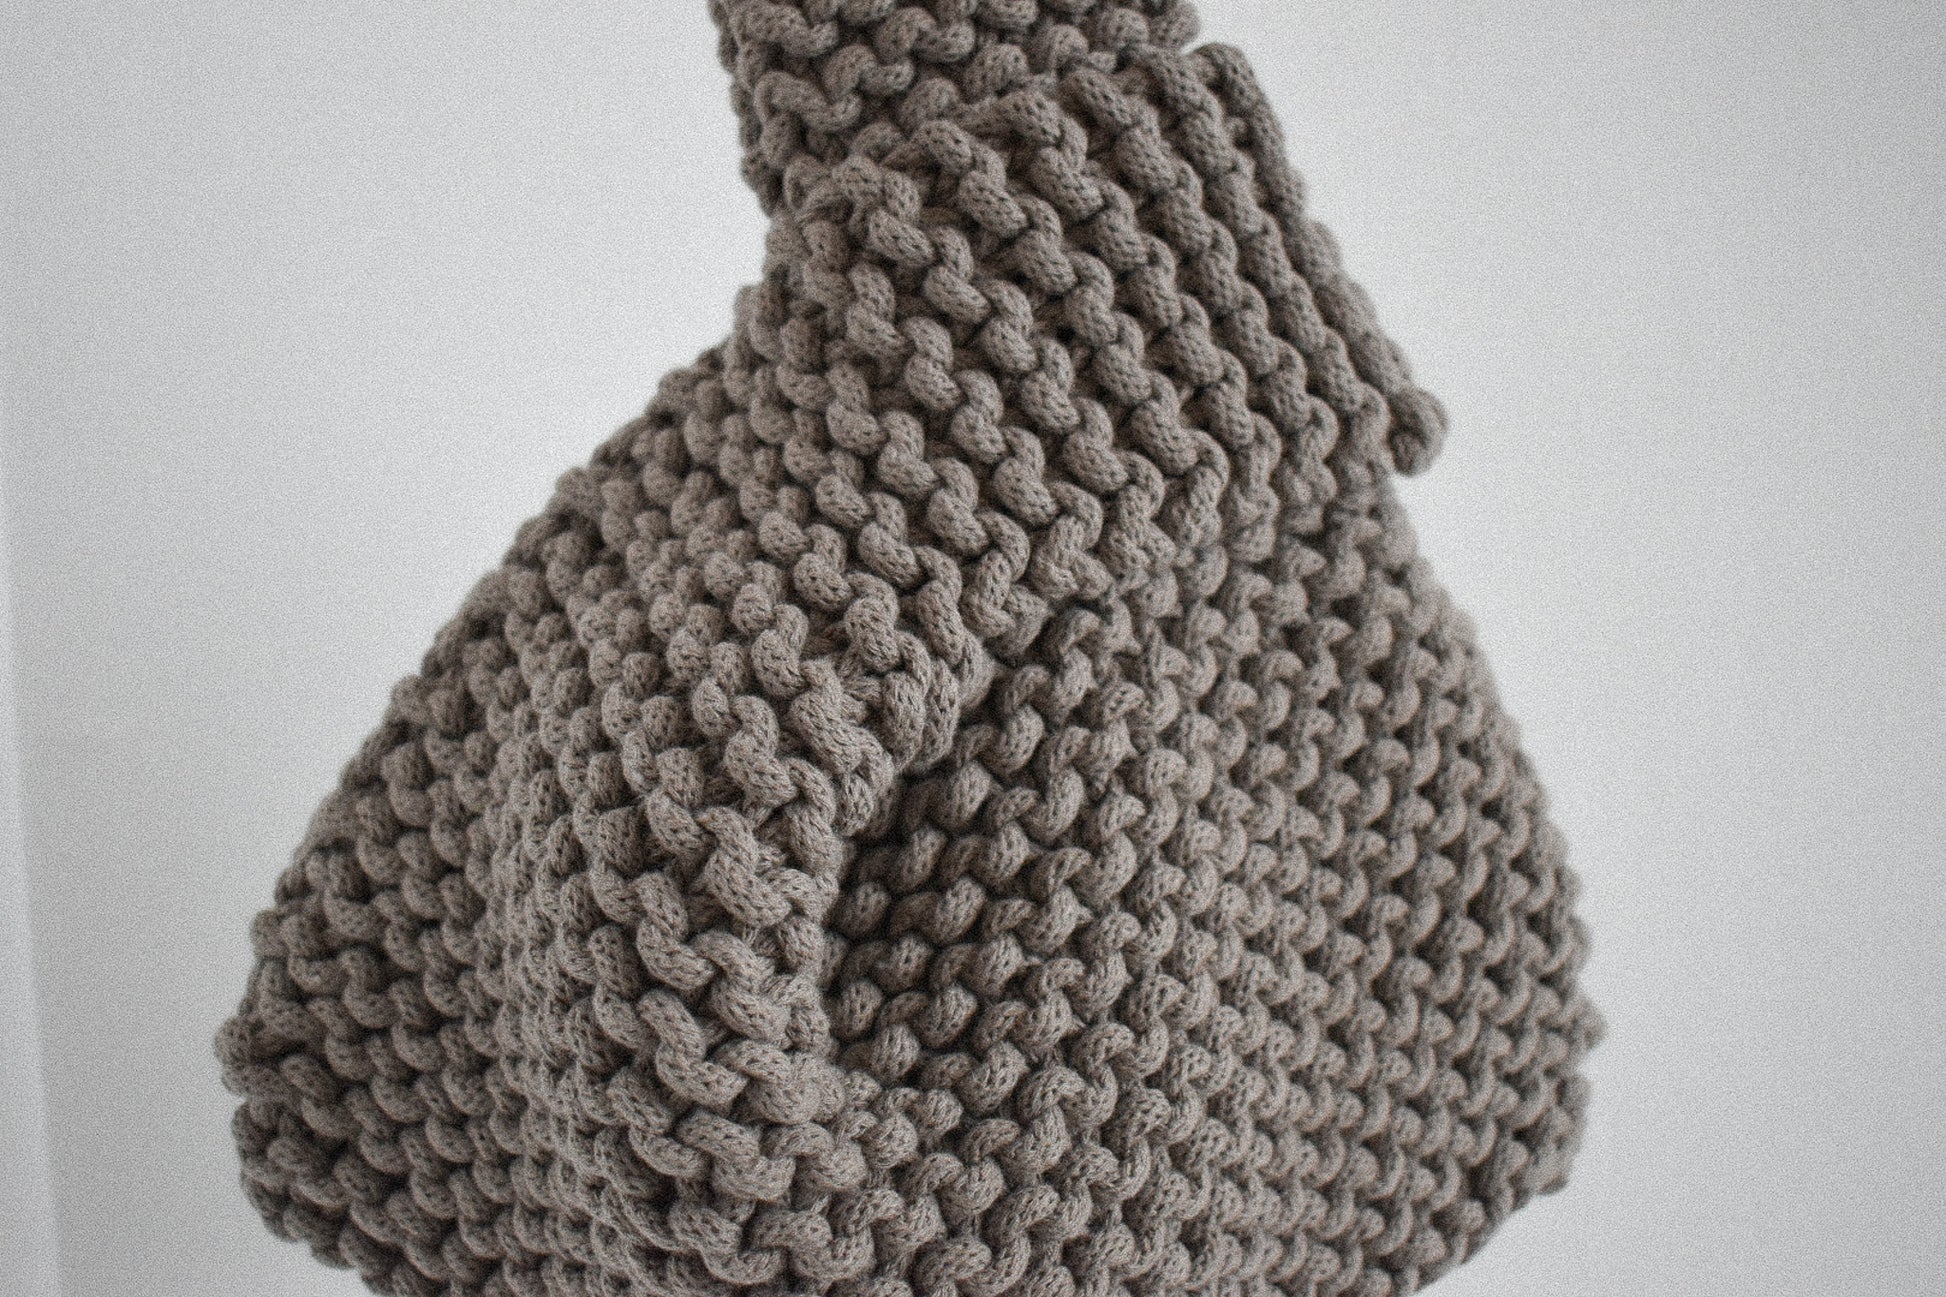 hand knitted knot bag, made with 100% recycled cotton textiles